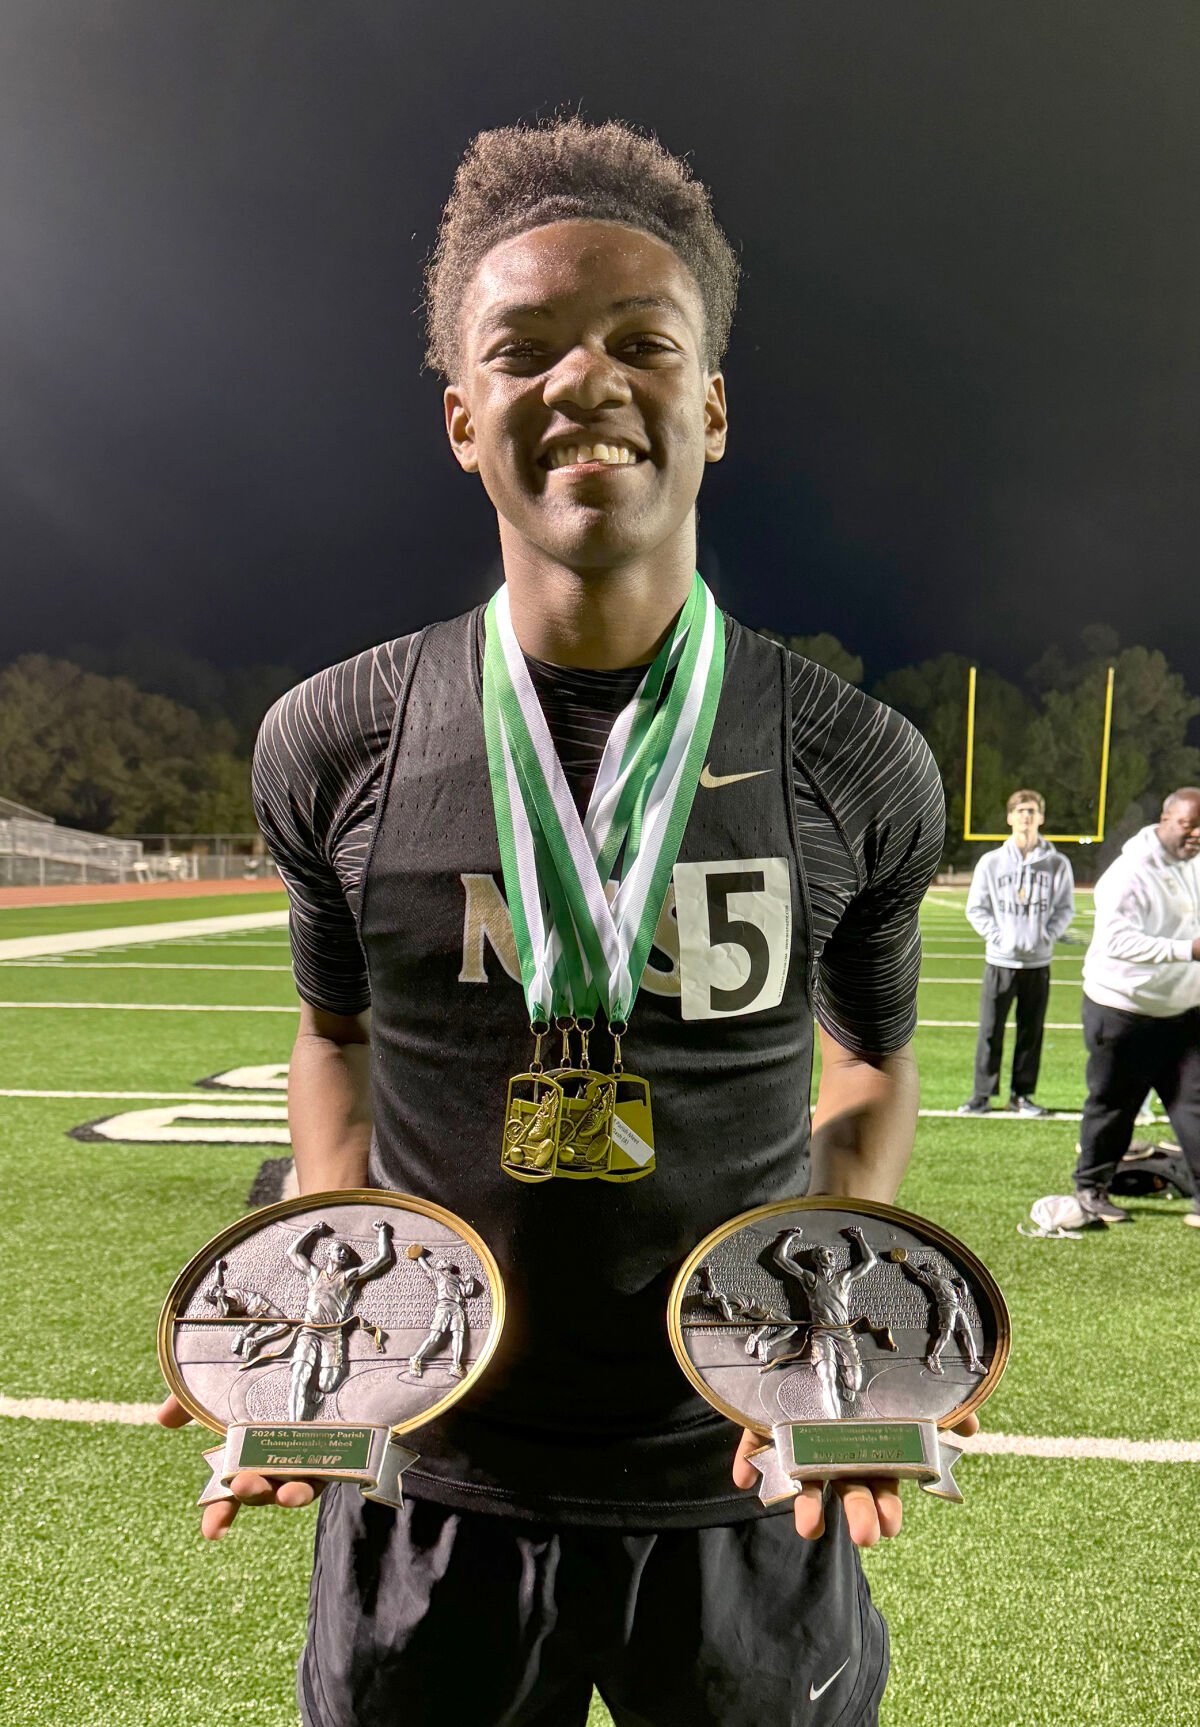 Exciting Wins by Slidell Boys & Fontainebleau Girls at St. Tammany Parish Track Meet